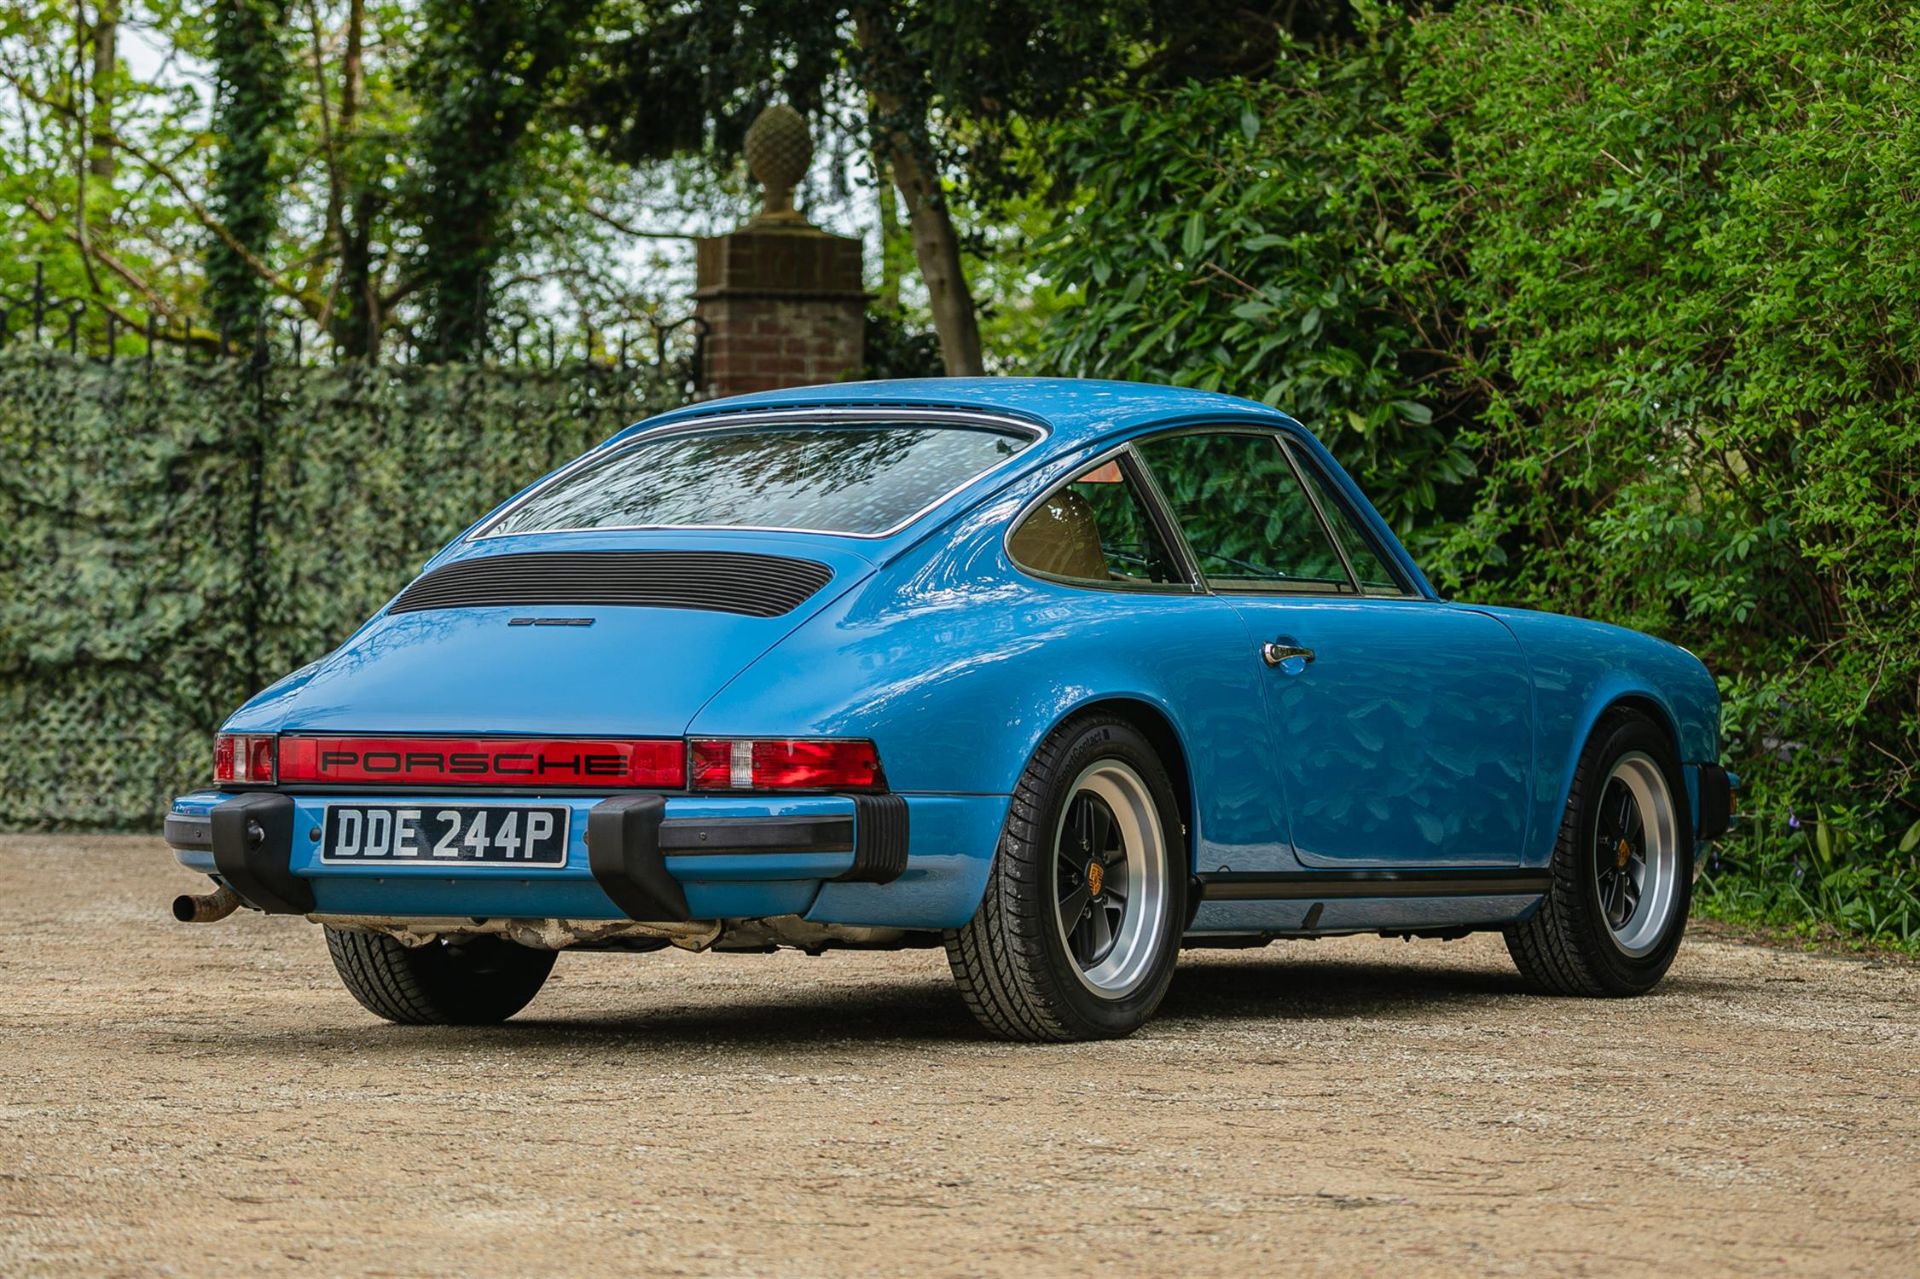 **Sold Pre-Sale**1976 Porsche 912E - Offered Directly From Mike Brewer - Image 4 of 10